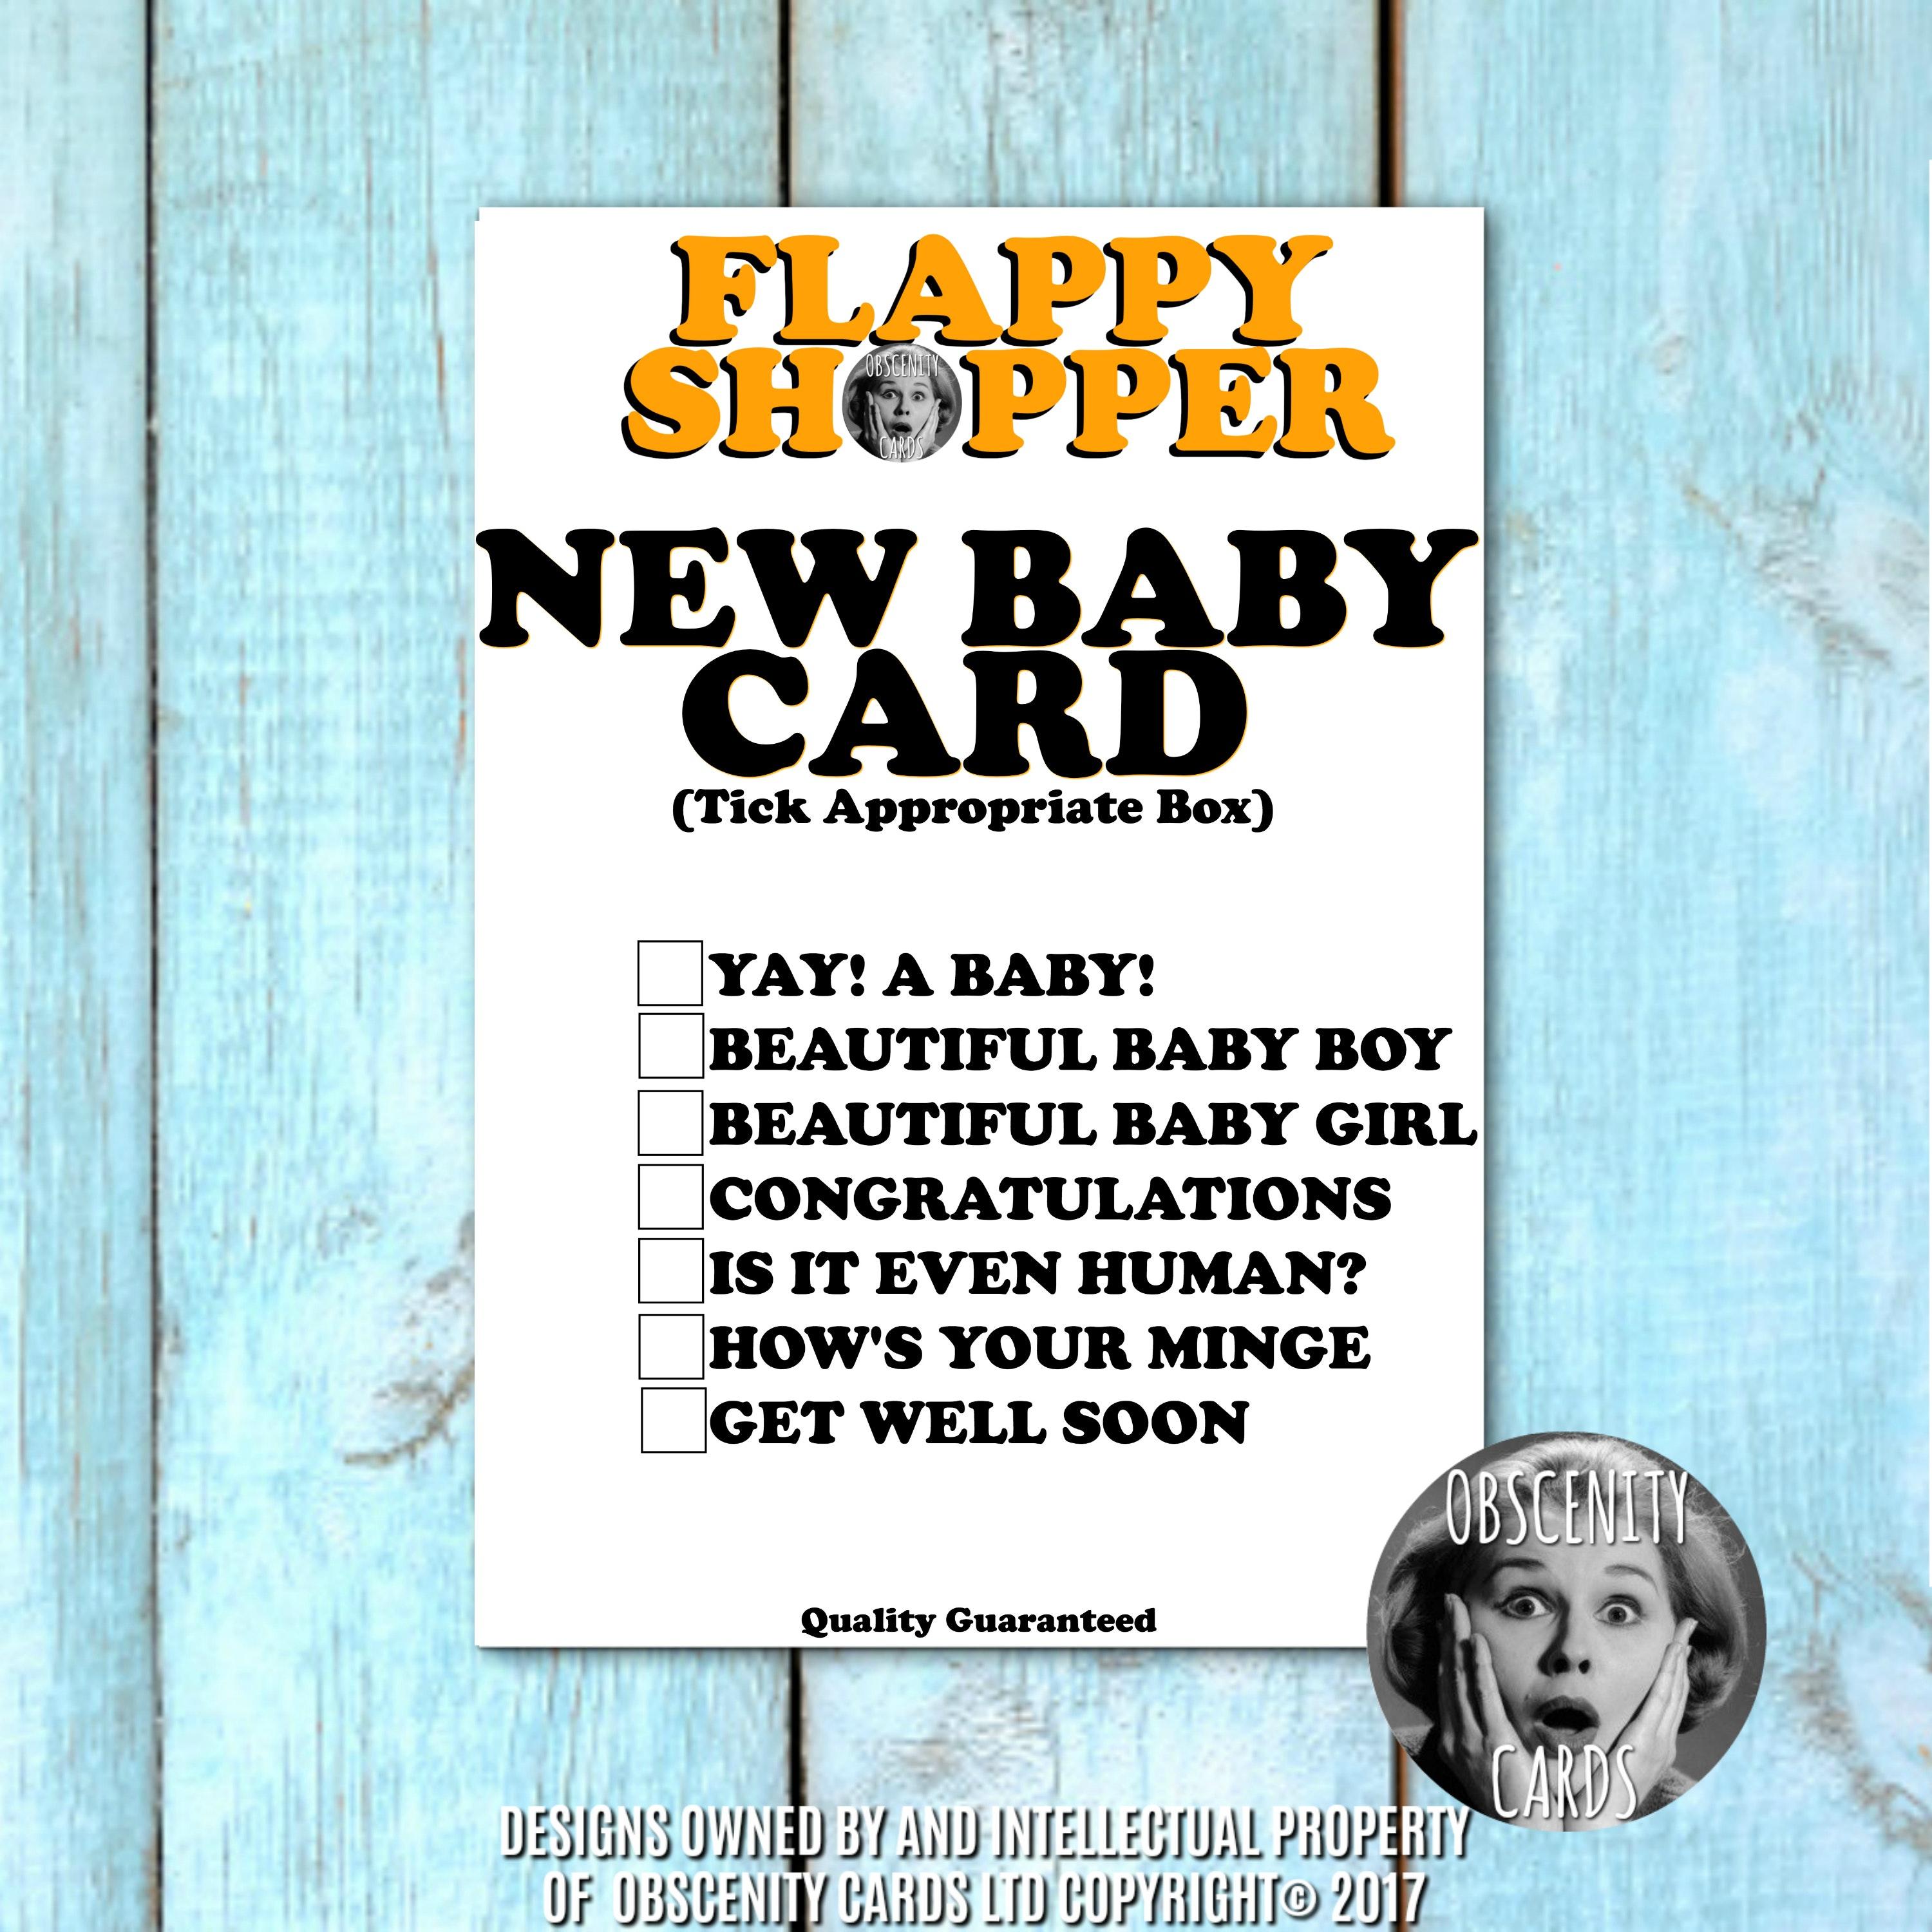 FLAPPY SHOPPER! NEW BABY CARD. Obscene funny offensive birthday cards by Obscenity cards. Obscene Funny Cards, Pens, Party Hats, Key rings, Magnets, Lighters & Loads More!